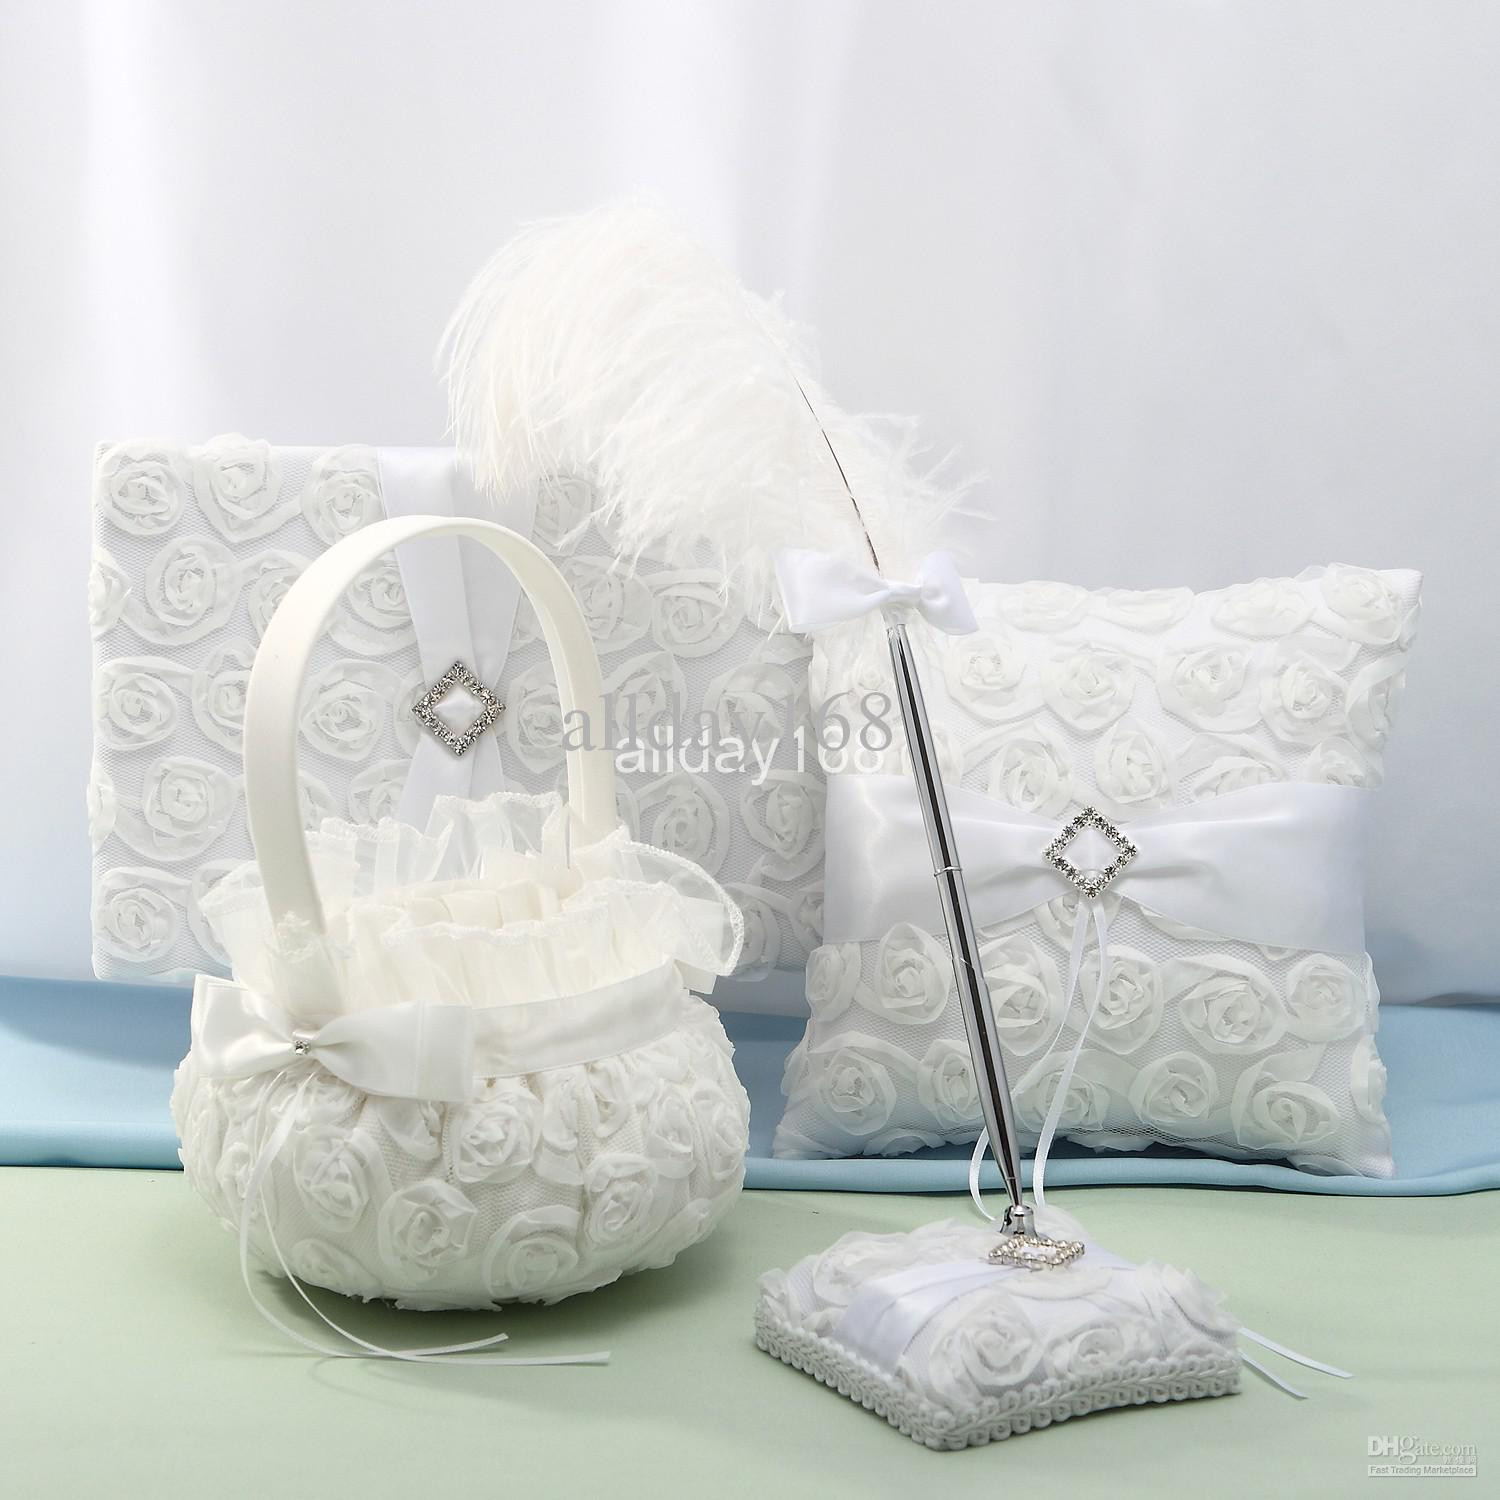 Wedding Pillow And Guest Book Sets
 2019 Unique Wedding Favors White Roses Feather Design